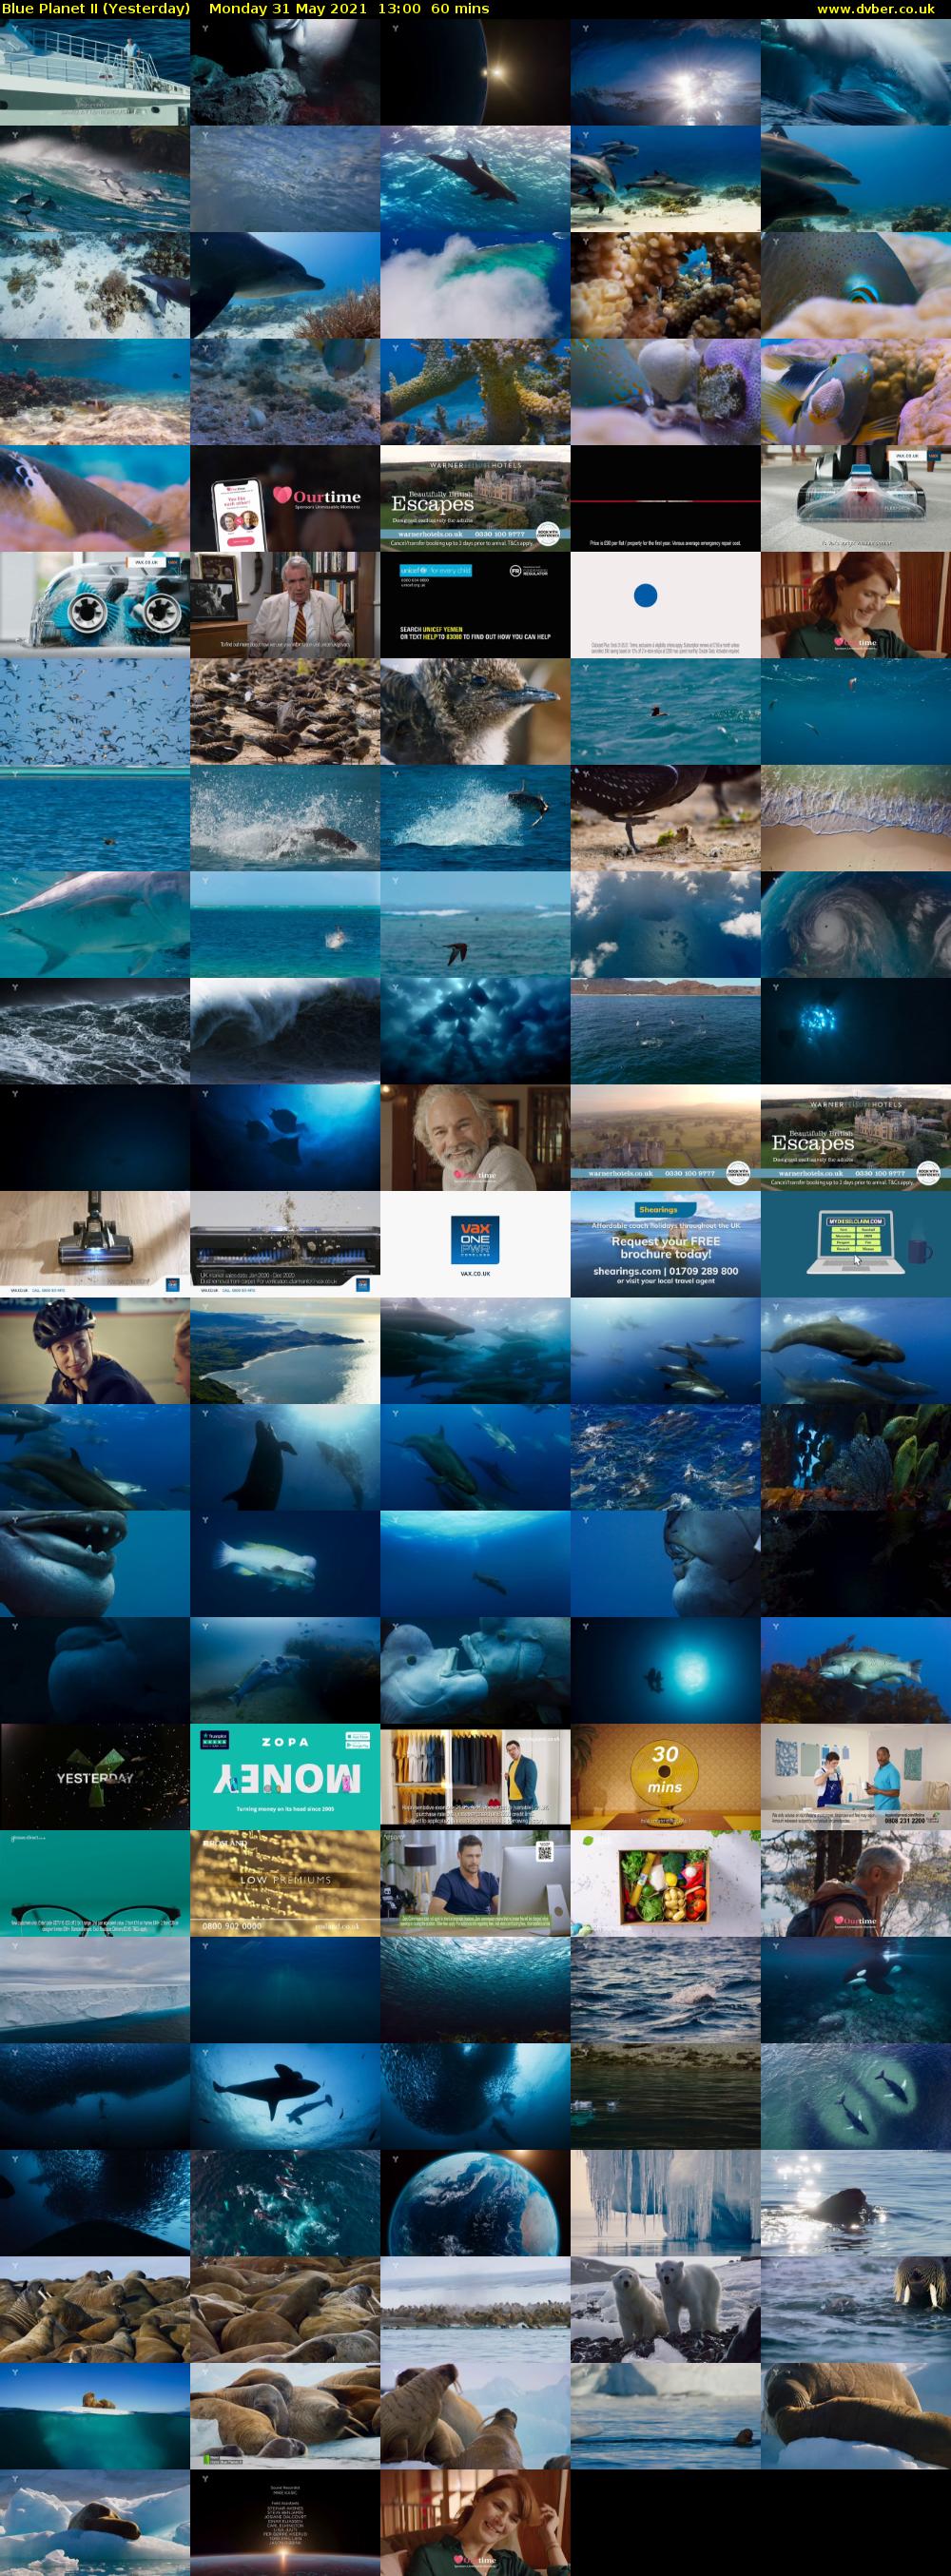 Blue Planet II (Yesterday) Monday 31 May 2021 13:00 - 14:00